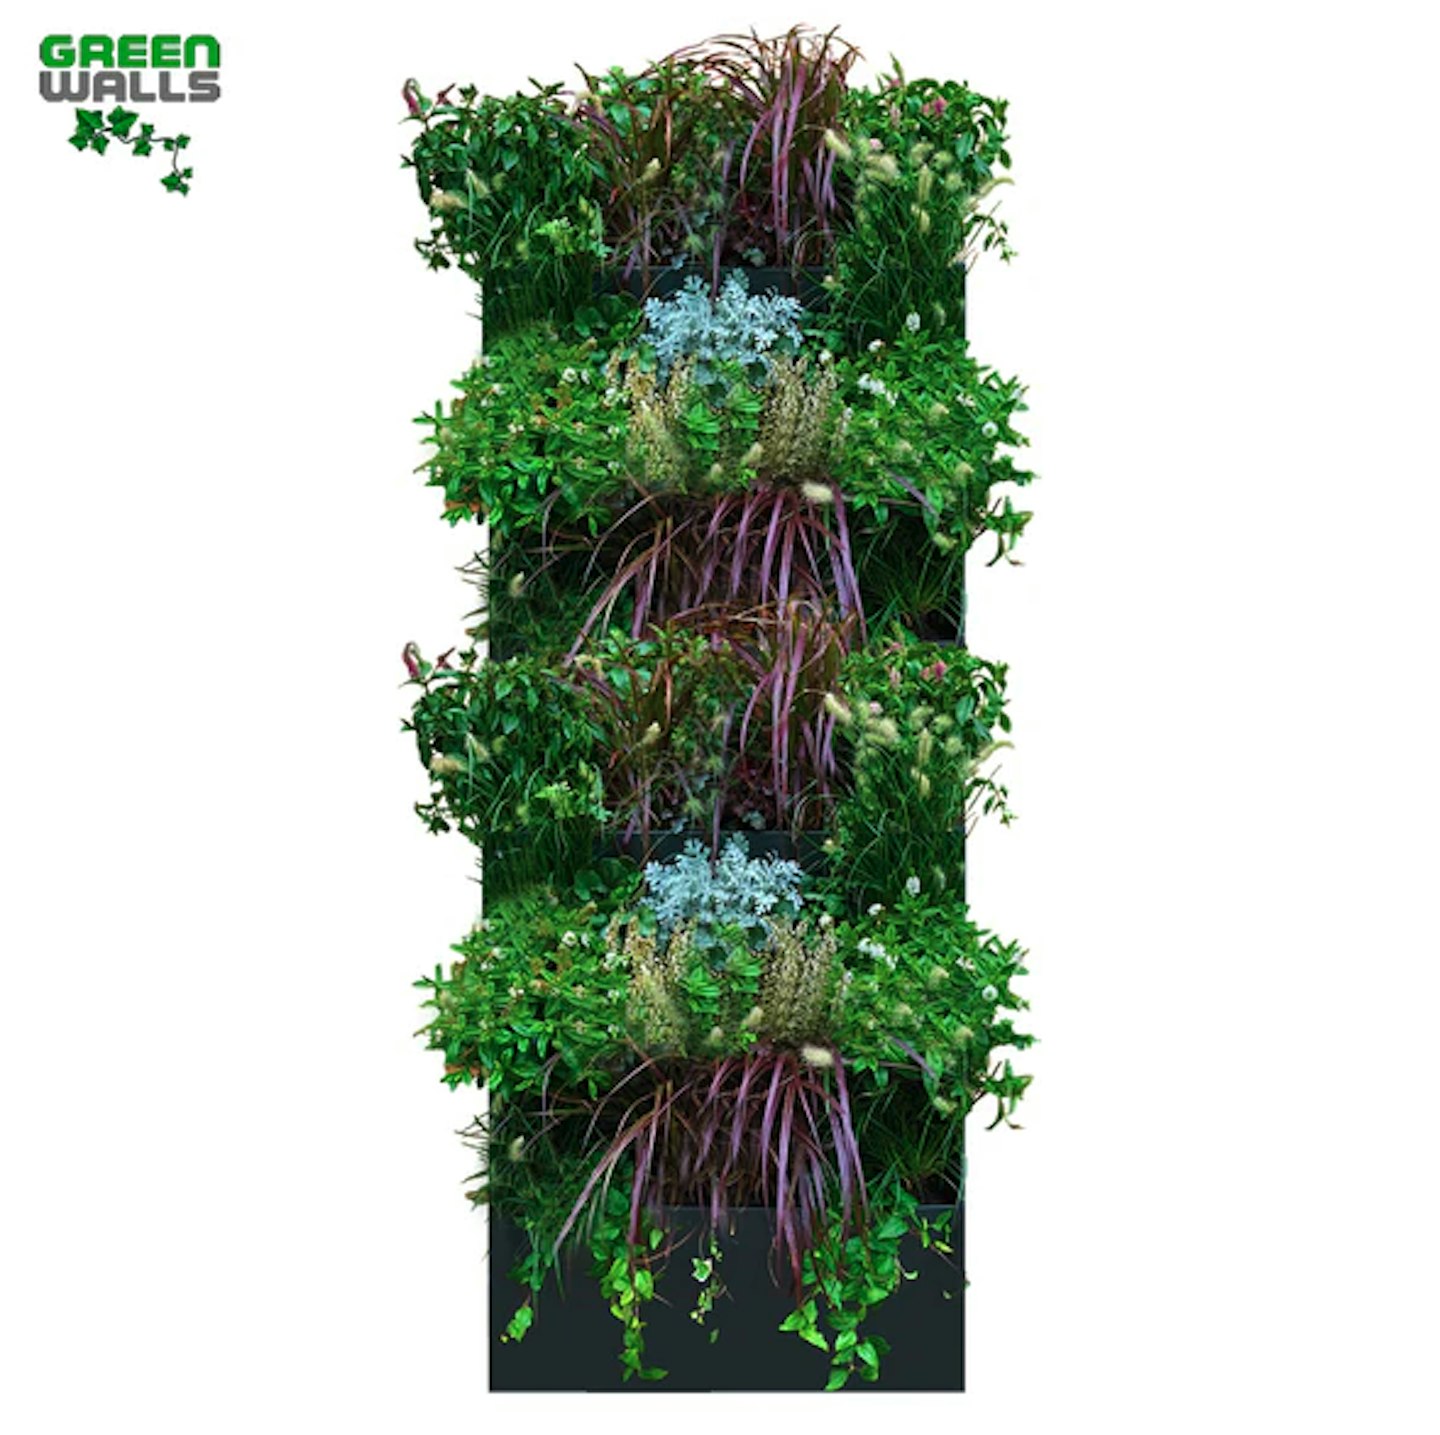 GREENWALLS 40X120CM KIT: 1xBOTTOM LEVEL 1xUPPER LEVEL with sidewalls 6 tray high vertical living plant wall system